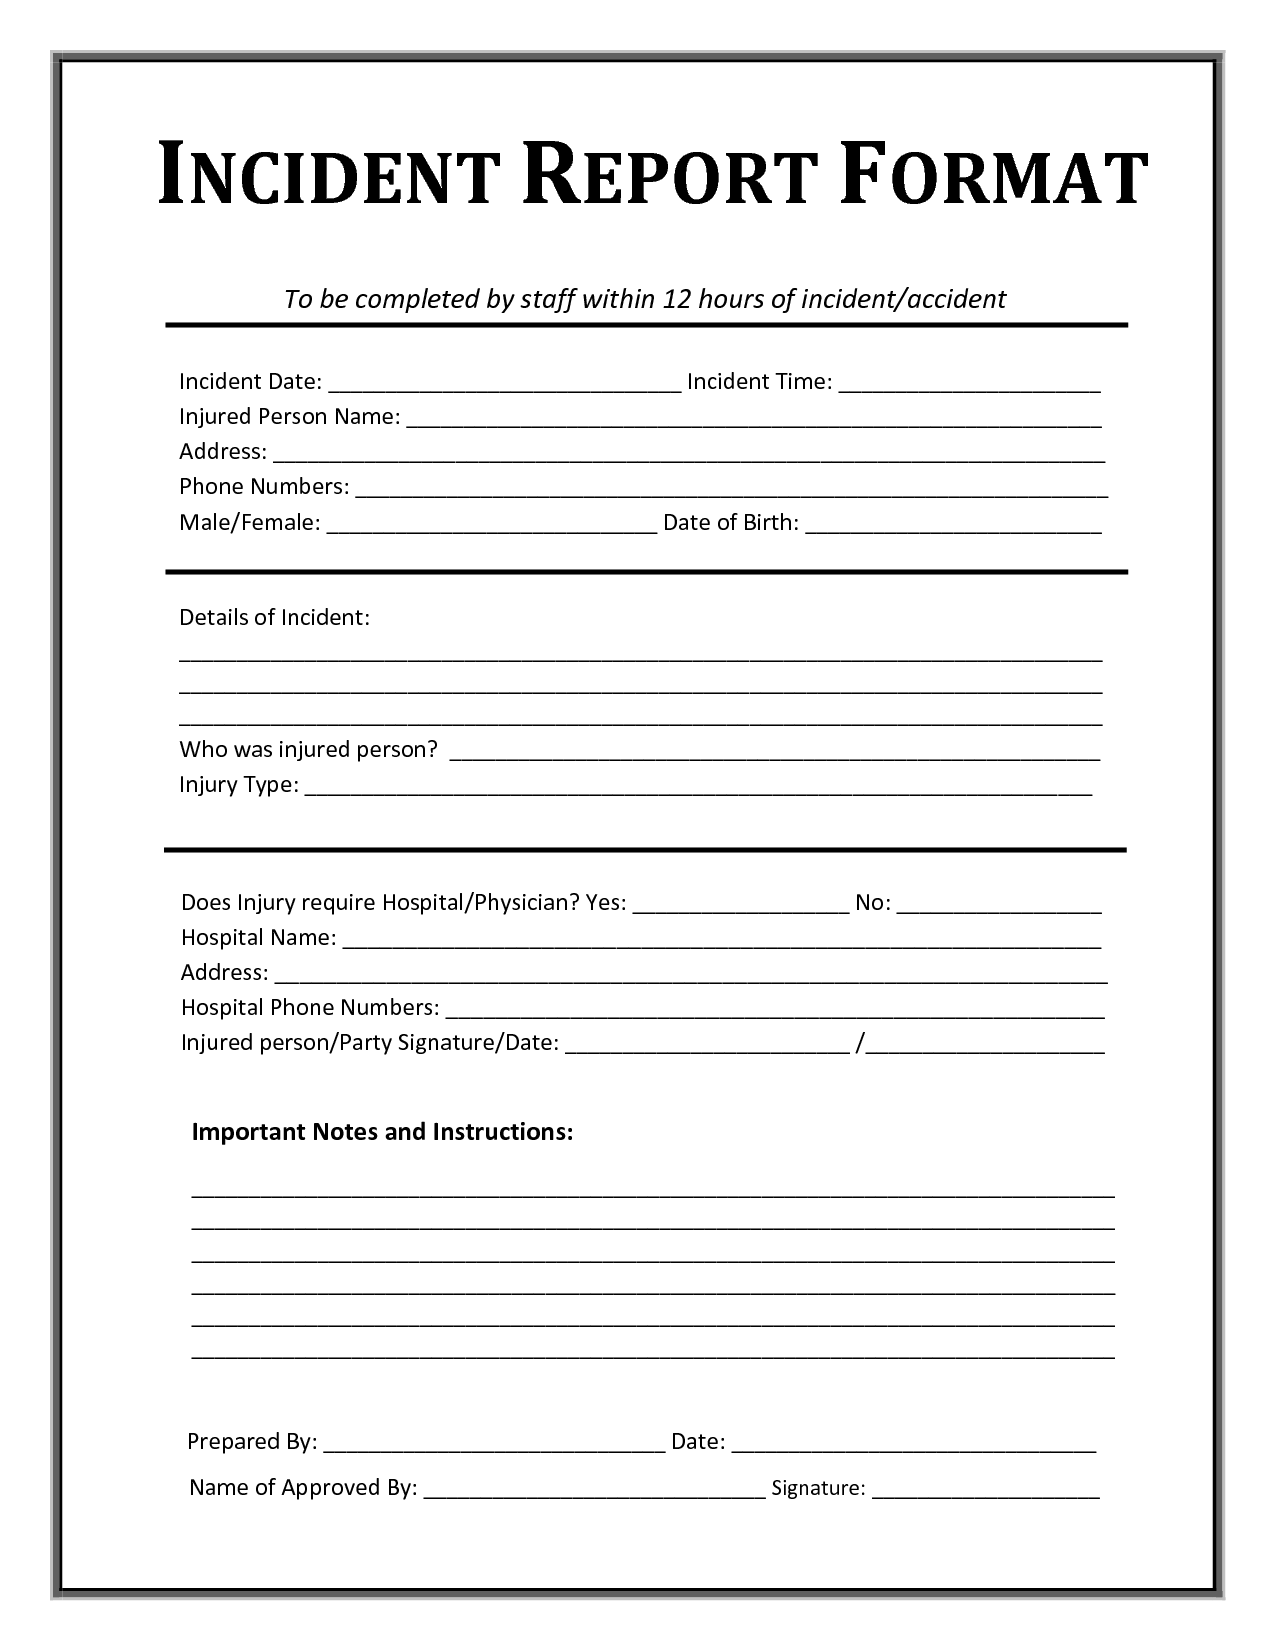 template for incident report for the workplace   Ecza.solinf.co